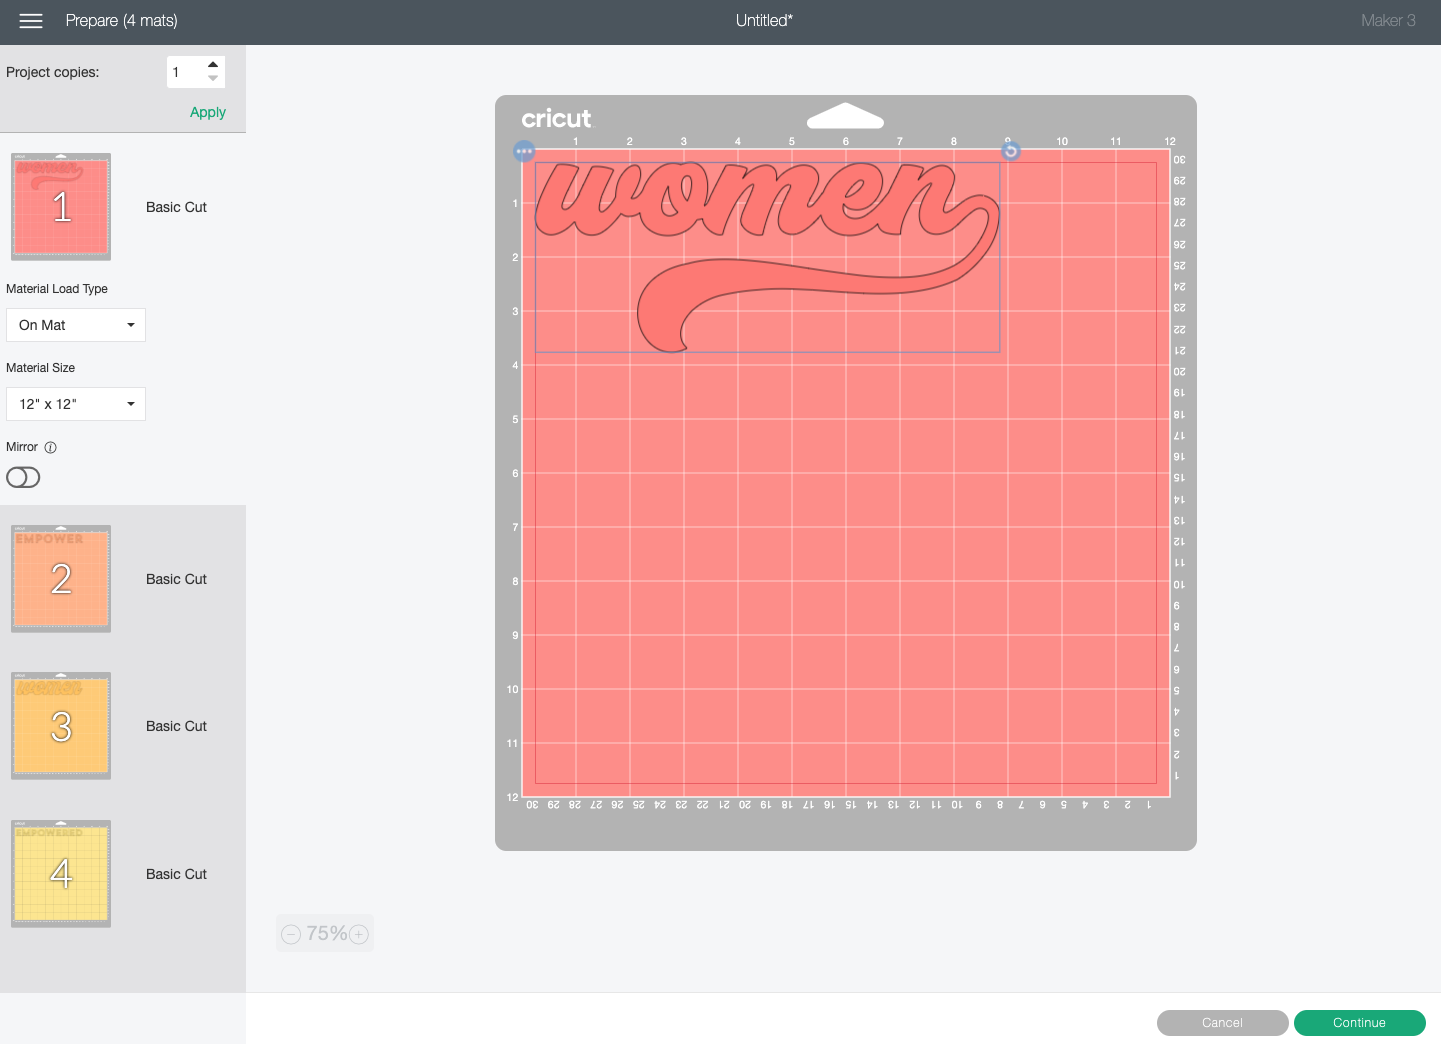 Cricut Design Space: Prepare Screen showing different parts of the image on different mats.